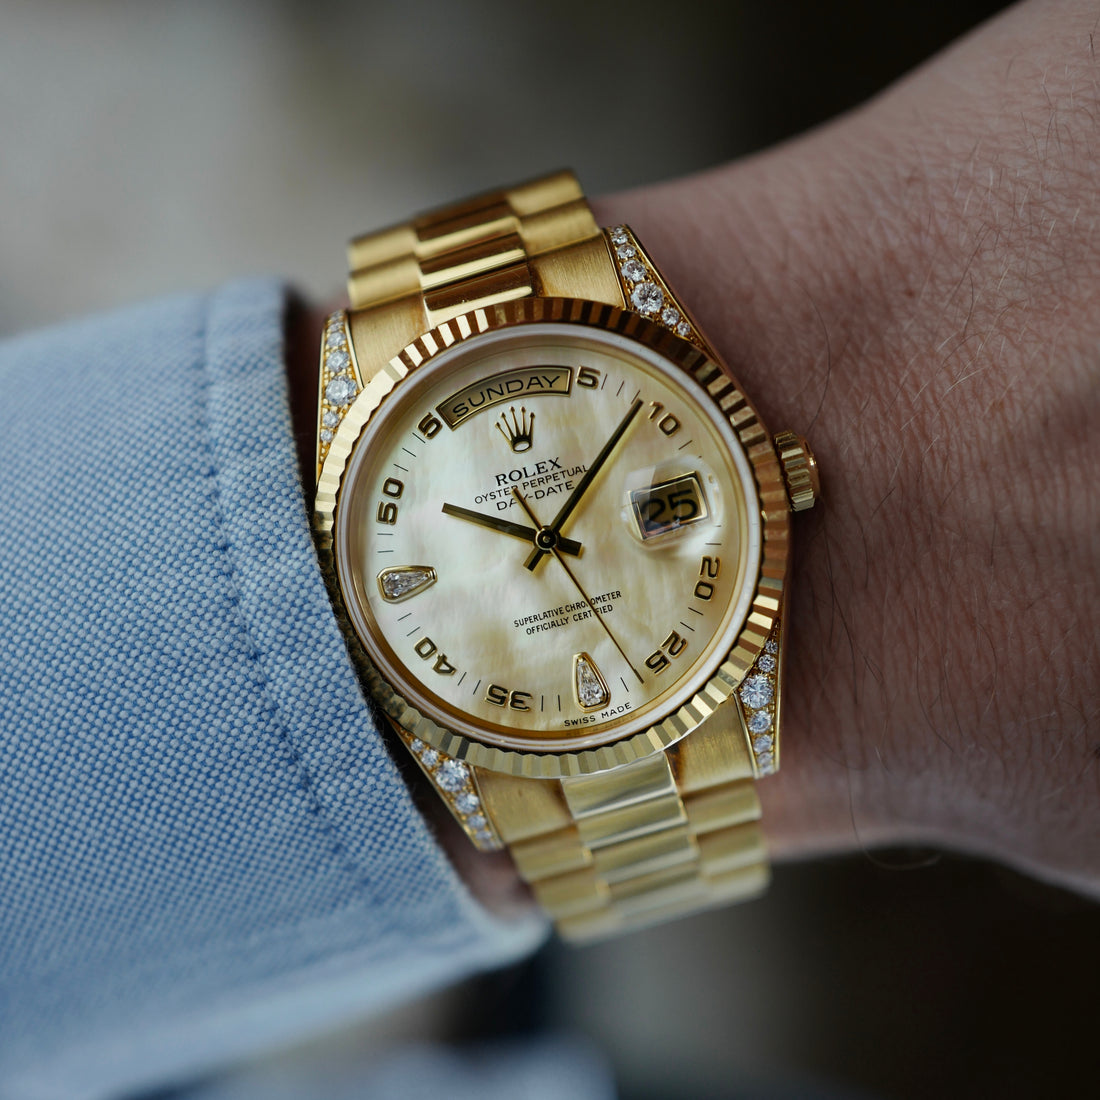 Rolex Yellow Gold Day-Date Mother of Pearl Diamond Ref. 118338